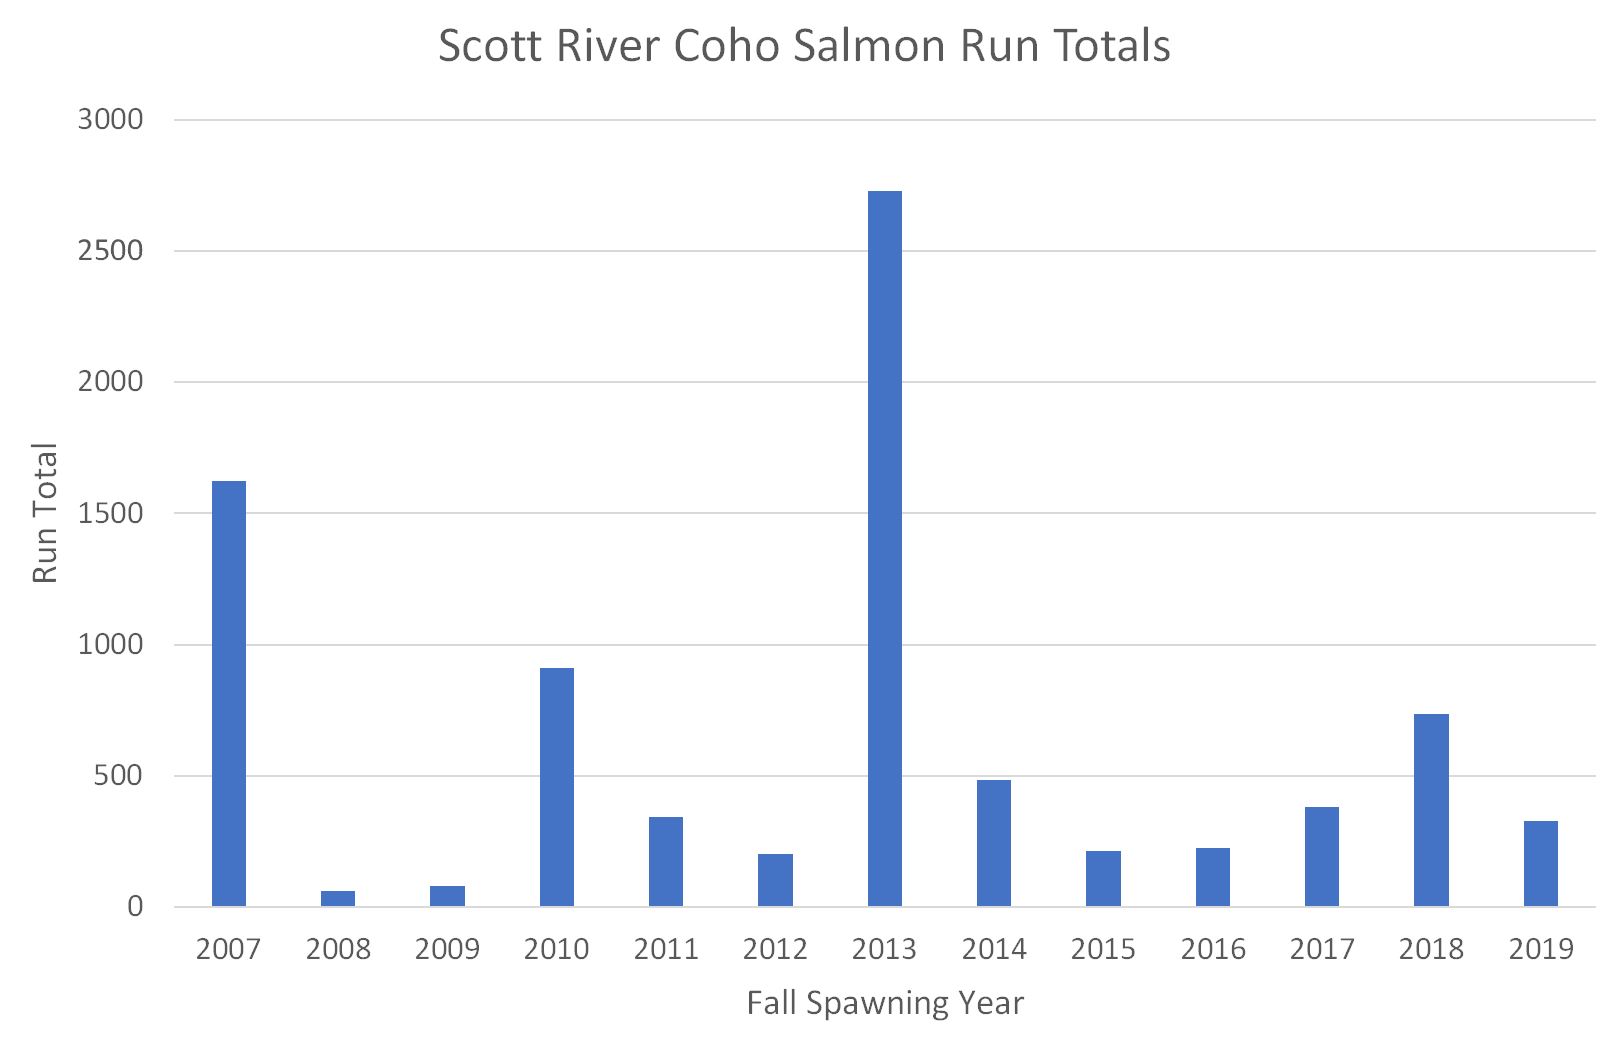 Figure 1. Escapement of adult Coho salmon to the Scott River from 2007 to 2019. Data source: CDFW, Yreka, CA.